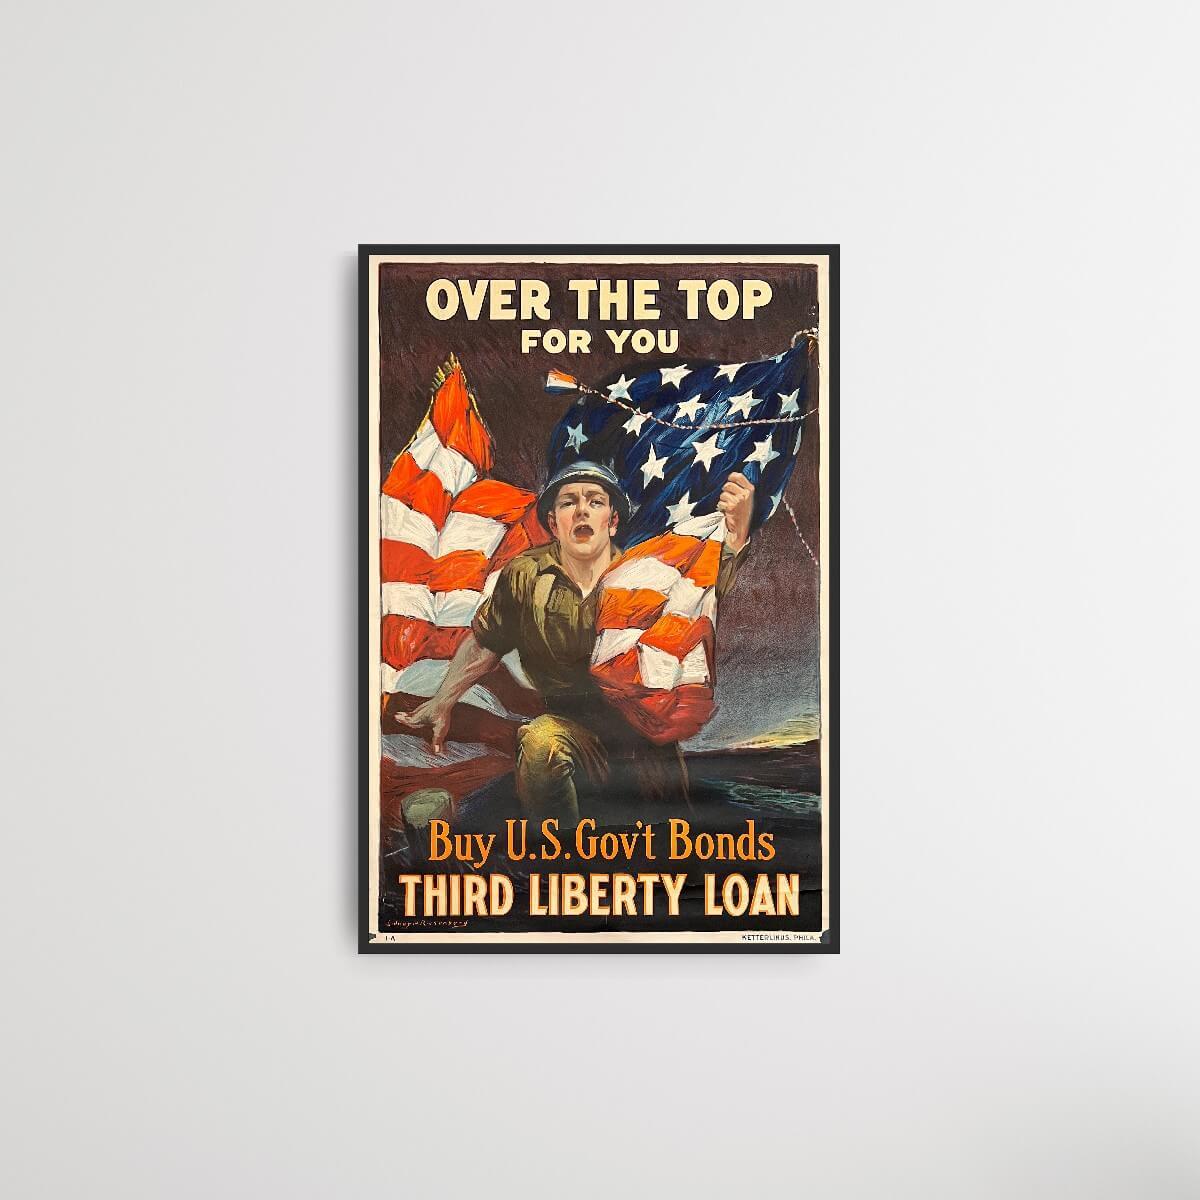 Over the top for you - Buy US Gov't Bonds - Third Liberty Loan